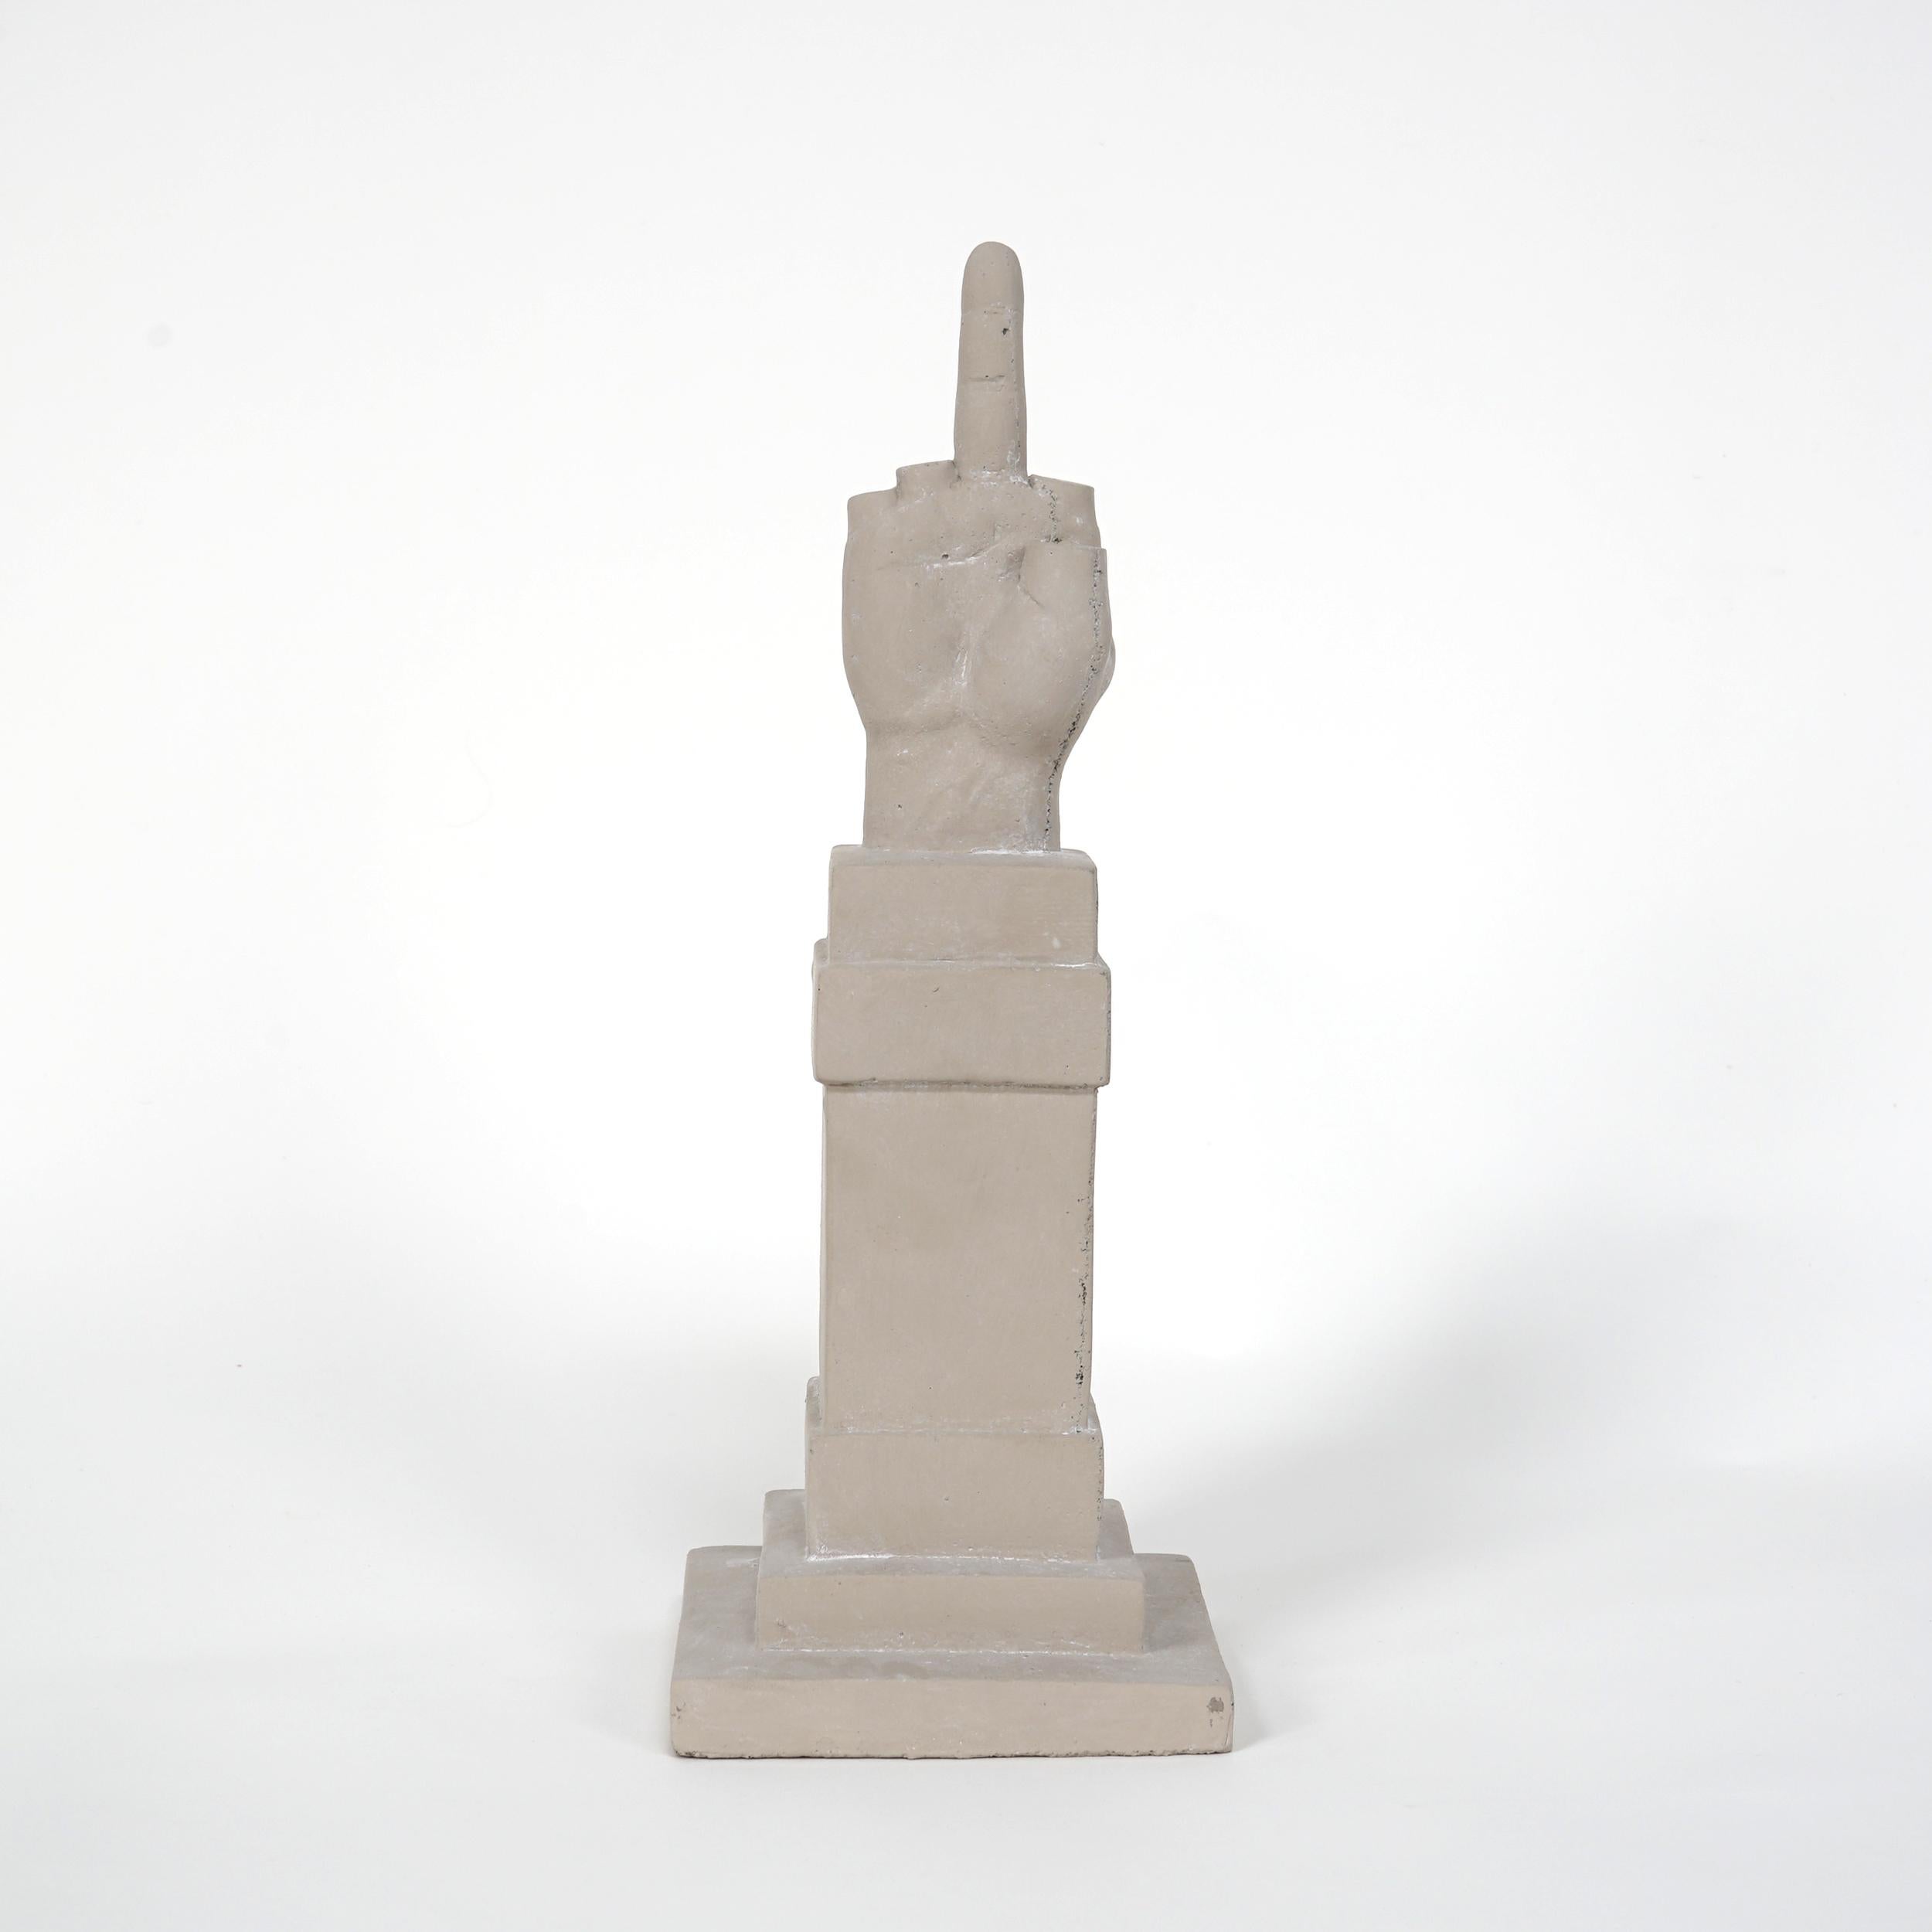 
Maurizio Cattelan
L.O.V. E. 
2015
Concrete
40 × 18 × 18 cm
(15.7 × 7.1 × 7.1 in)
Stamped by artist's estate
Edition of 1800
In mint condition, in the original wooden crate and accompanied by a certificate of authenticity

The statue, which bears